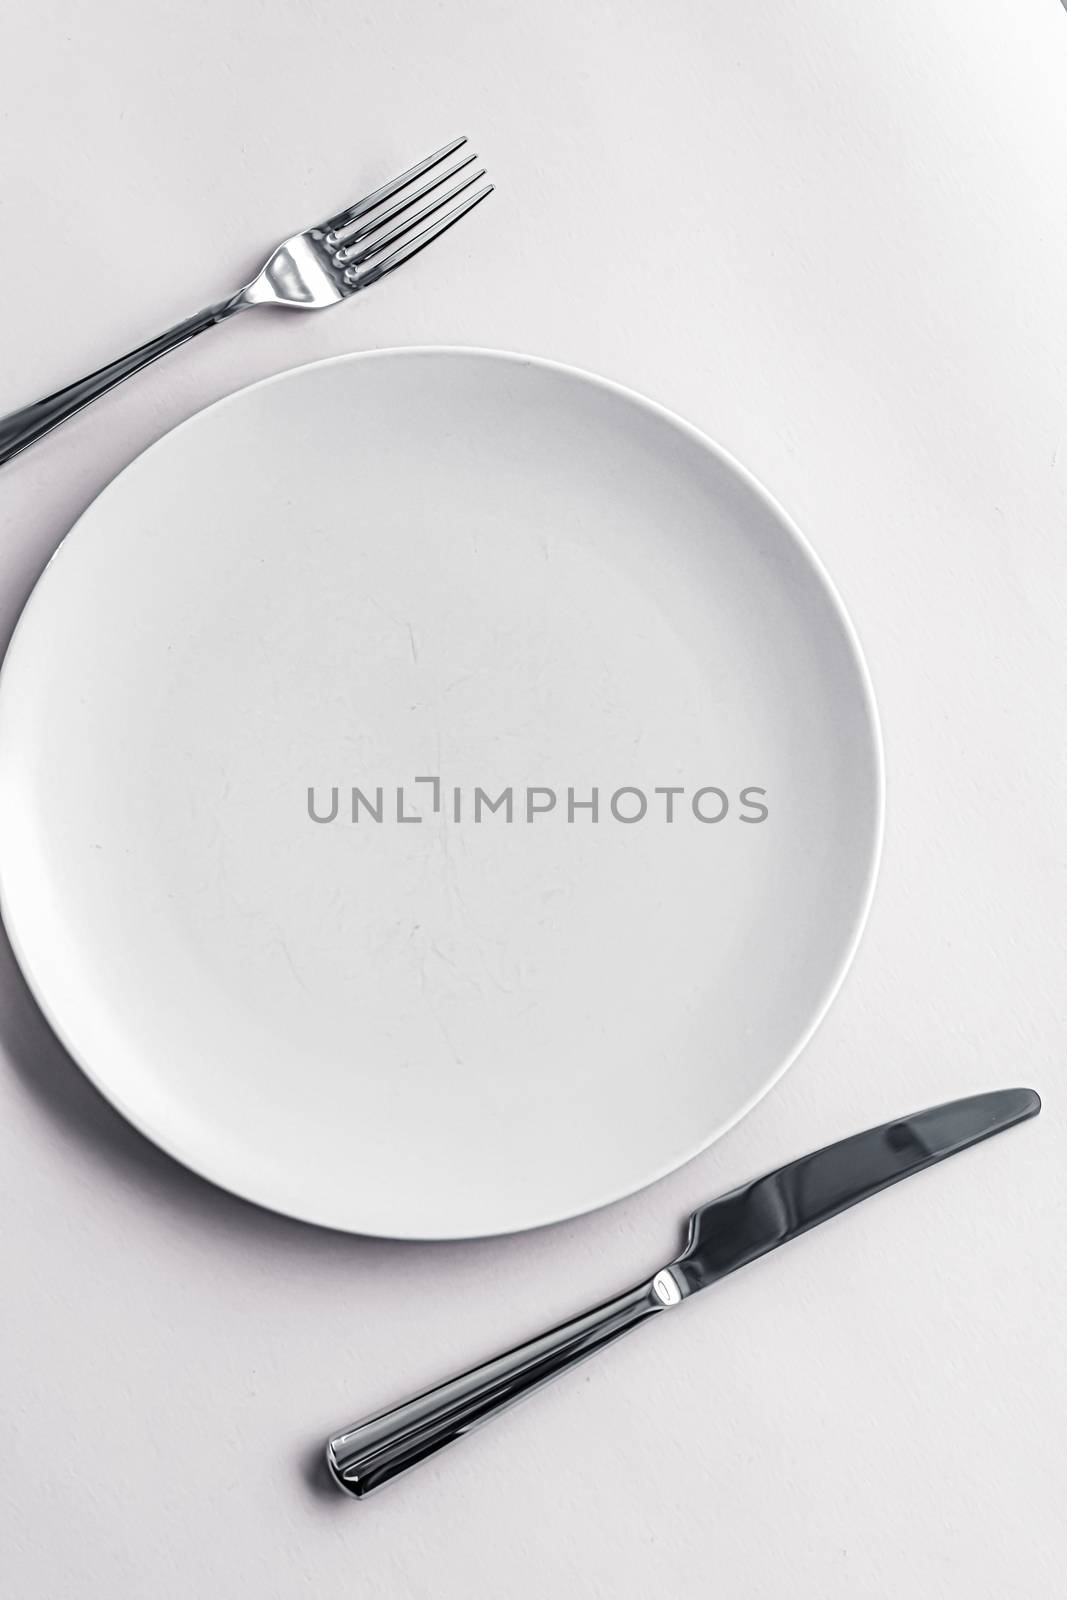 Empty plate and cutlery as mockup set on white background, top tableware for chef table decor and menu branding design